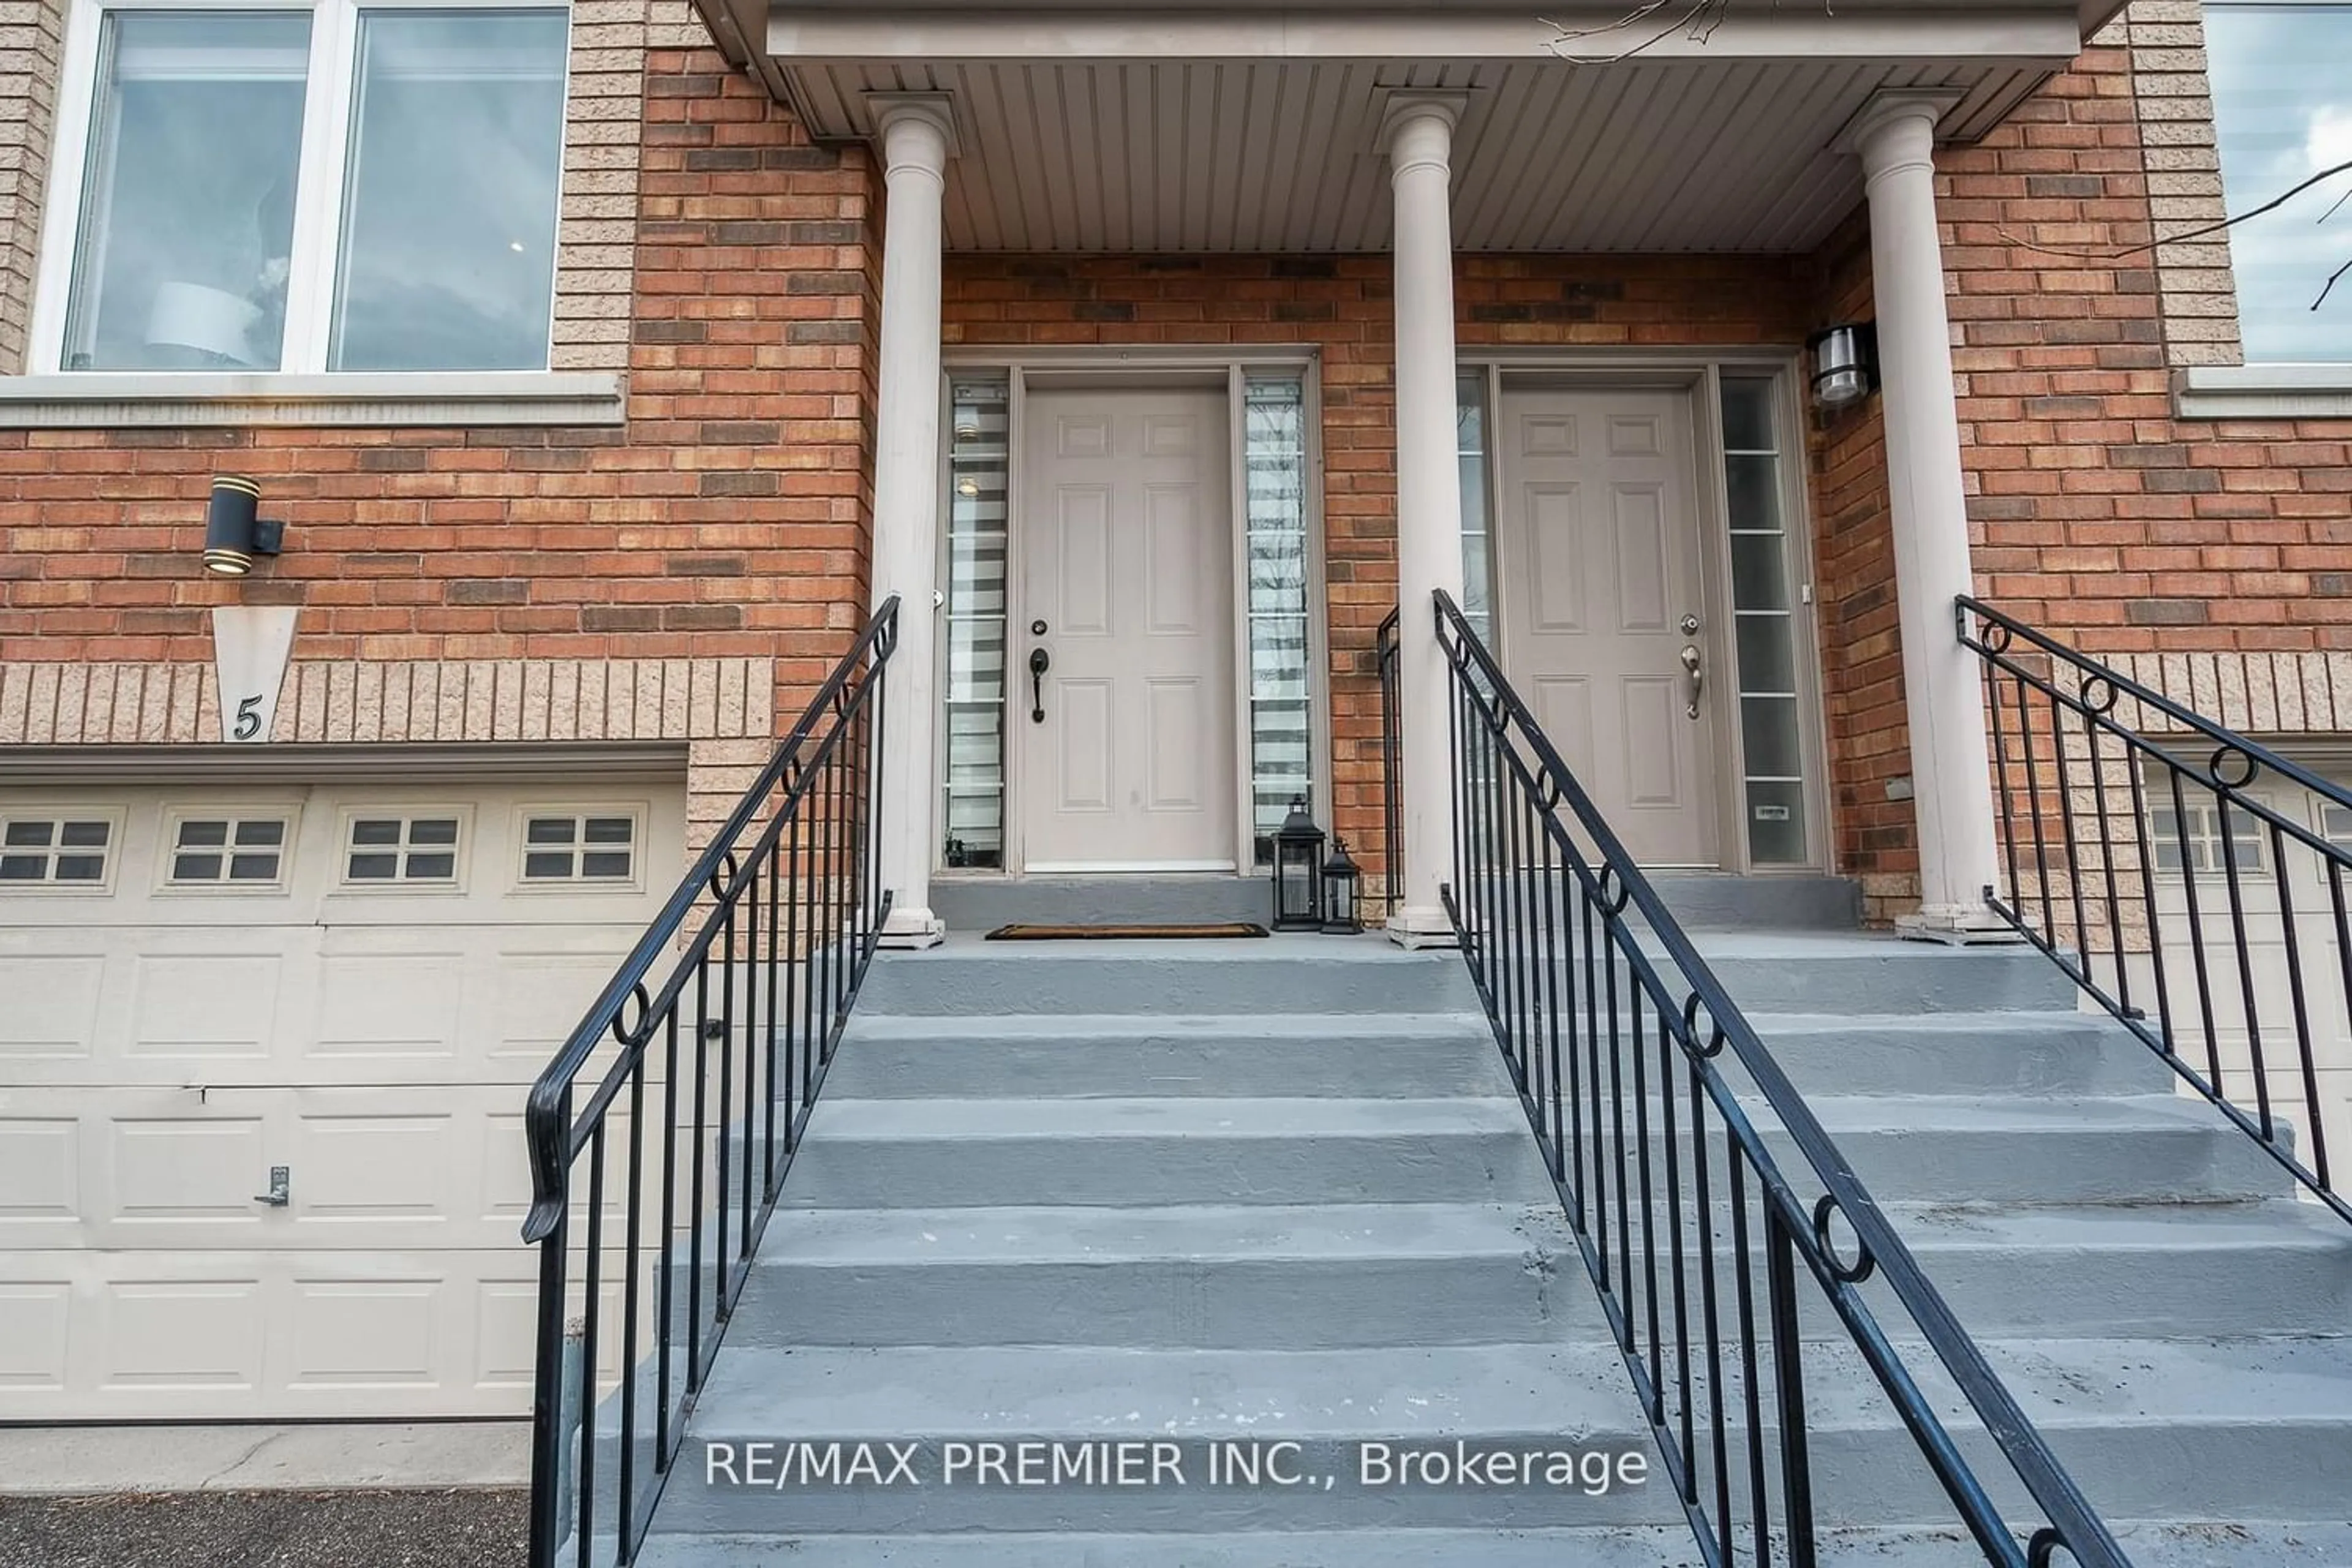 Home with brick exterior material for 8032 Kipling Ave #5, Vaughan Ontario L4L 2A1